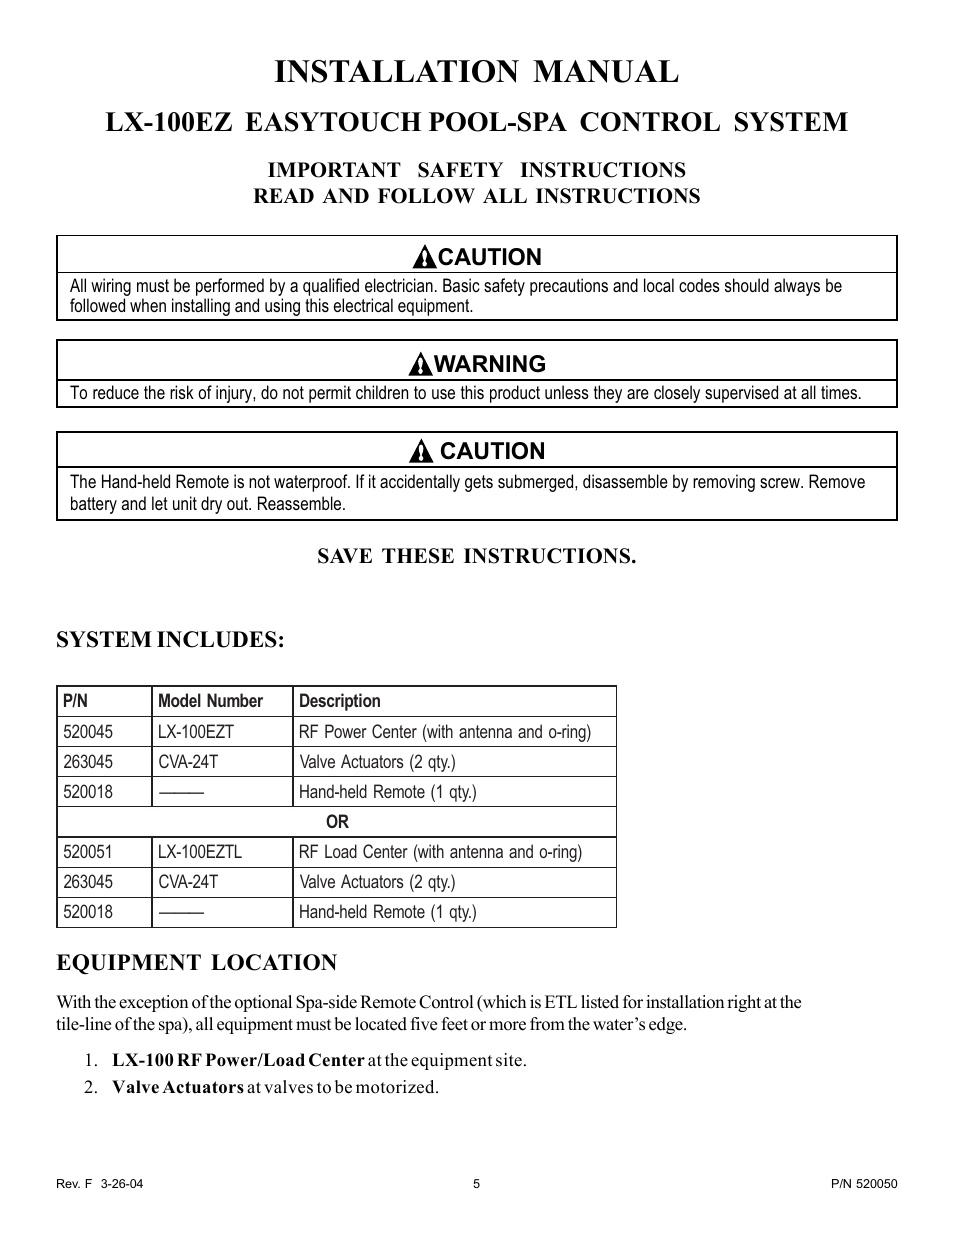 Installation manual, Lx-100ez easytouch pool-spa control system, Caution | Warning, System includes: equipment location | Pentair EasyTouch Pool/Spa Control System LX-100EZ User Manual | Page 5 / 32